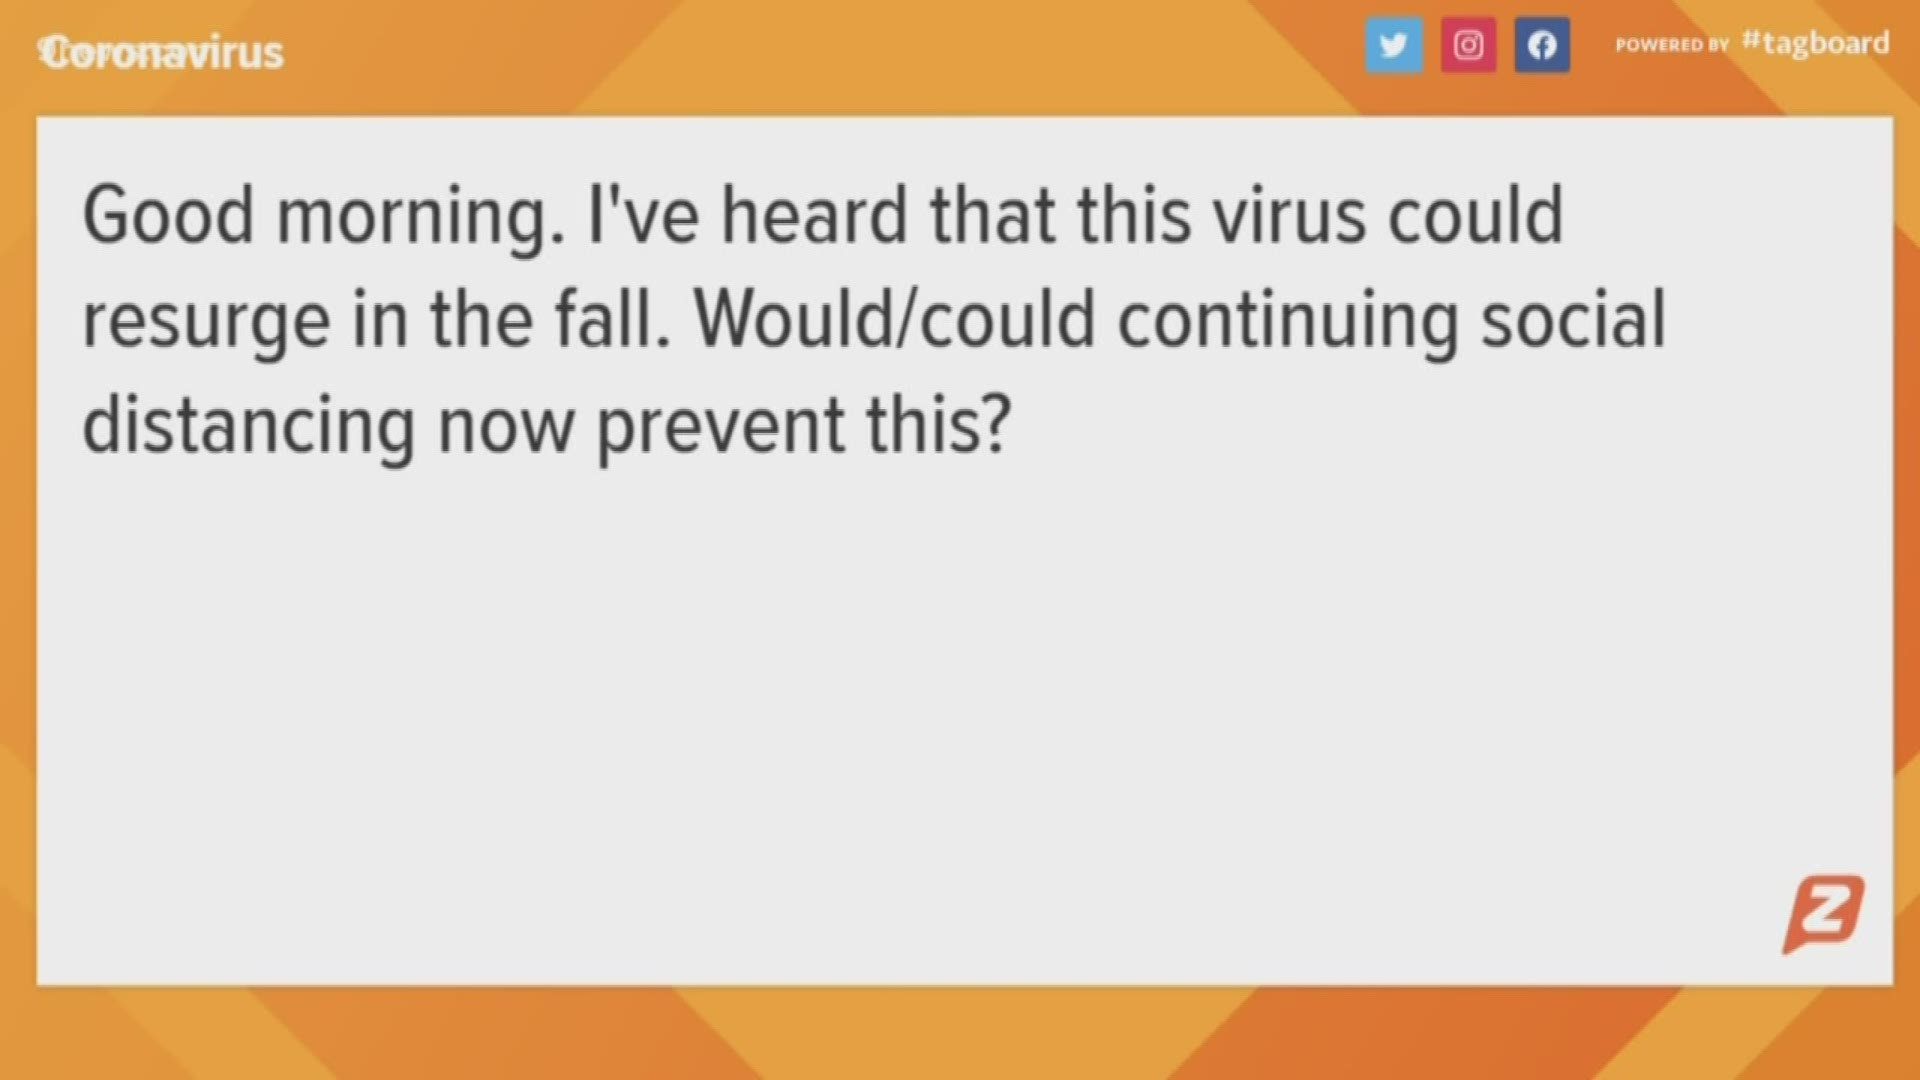 9Health Expert, Dr. Payal Kohli, answers your questions about the coronavirus.